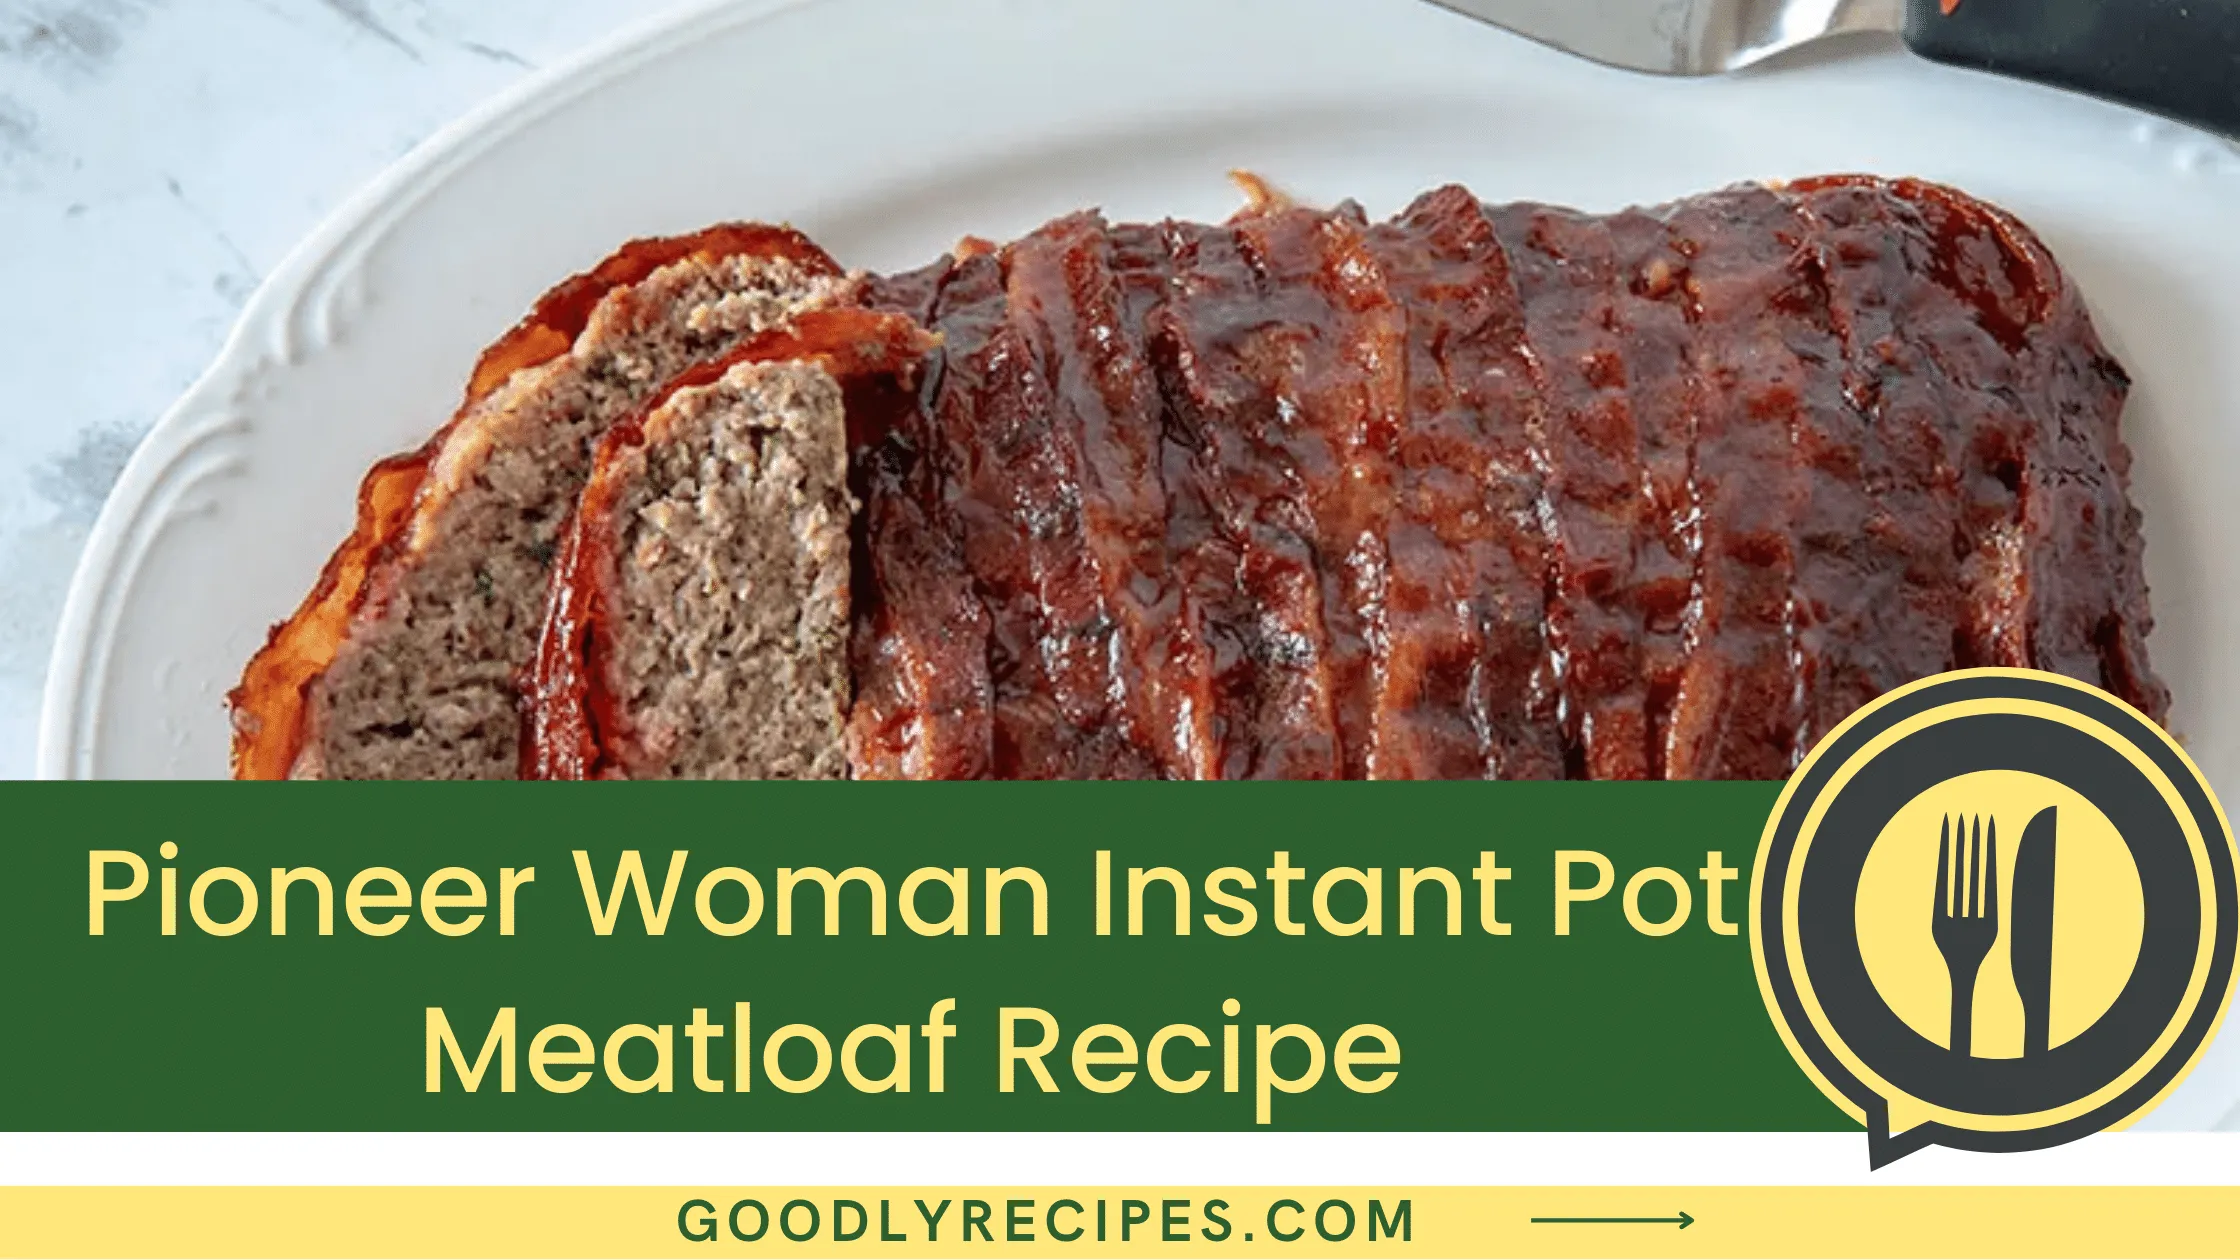 Pioneer Woman Instant Pot Meatloaf Recipe - For Food Lovers